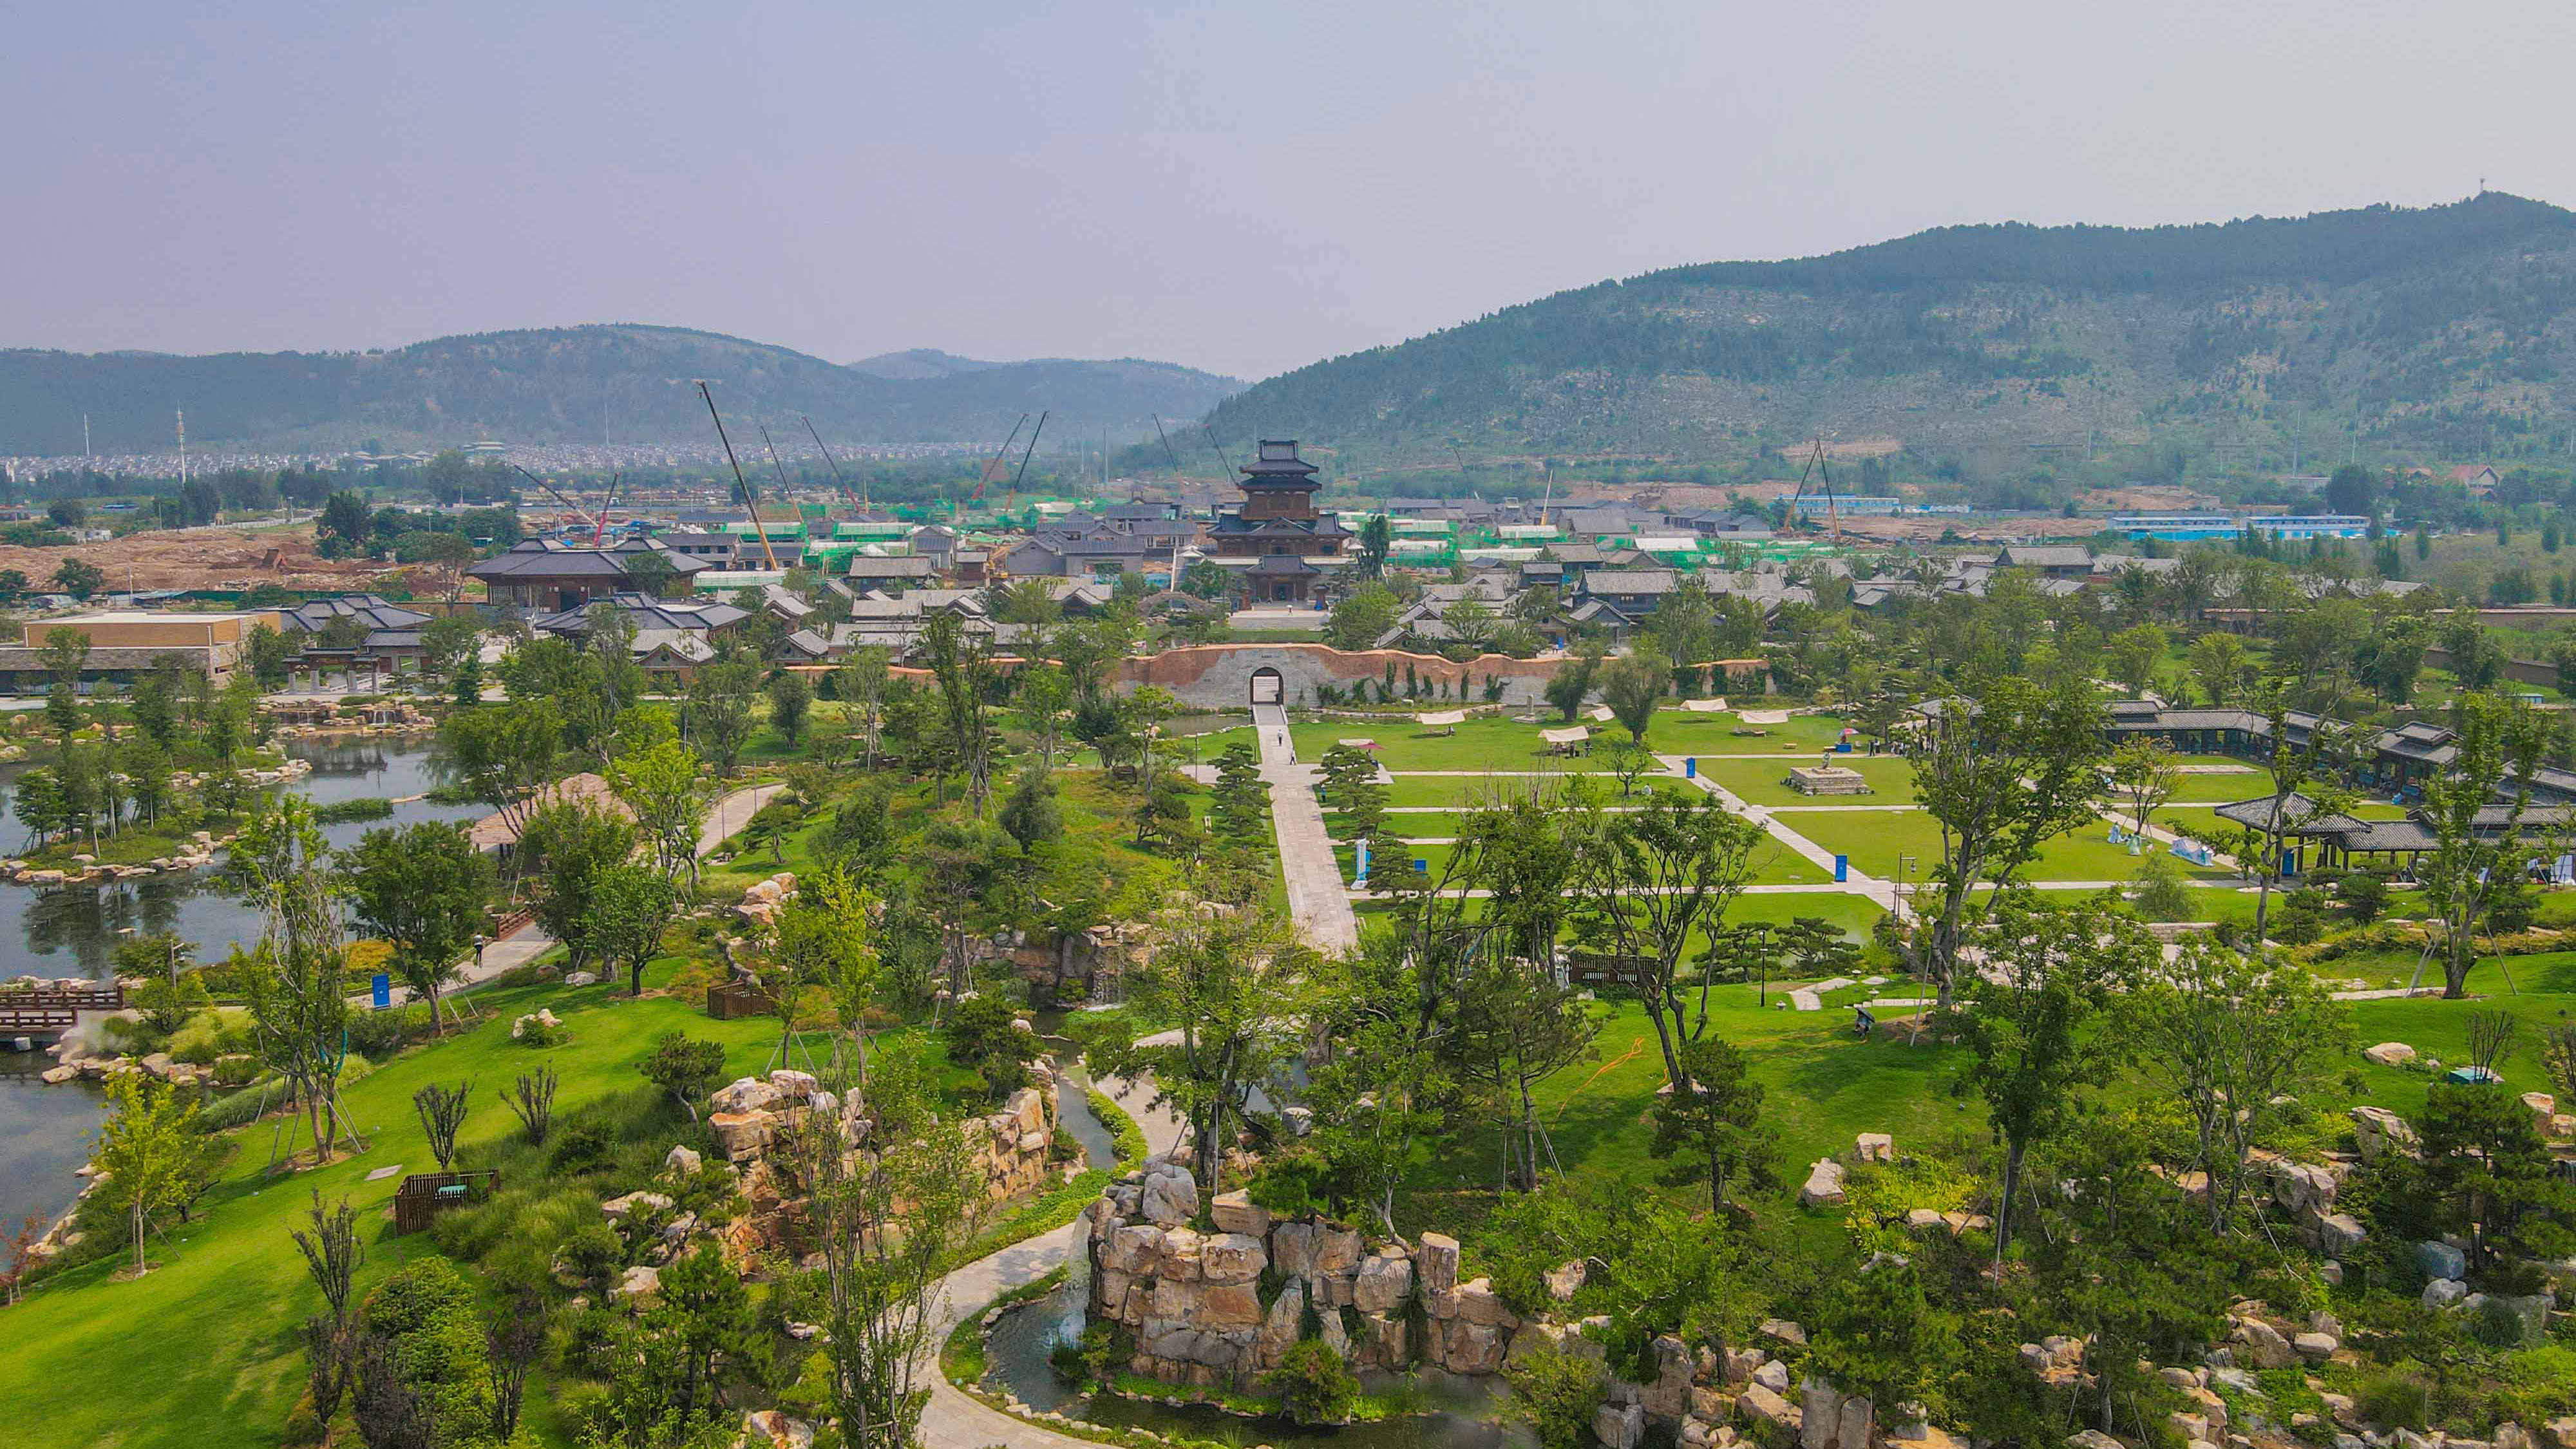 Drone view reveals fascinating Luyuan Town in Confucius' birthplace